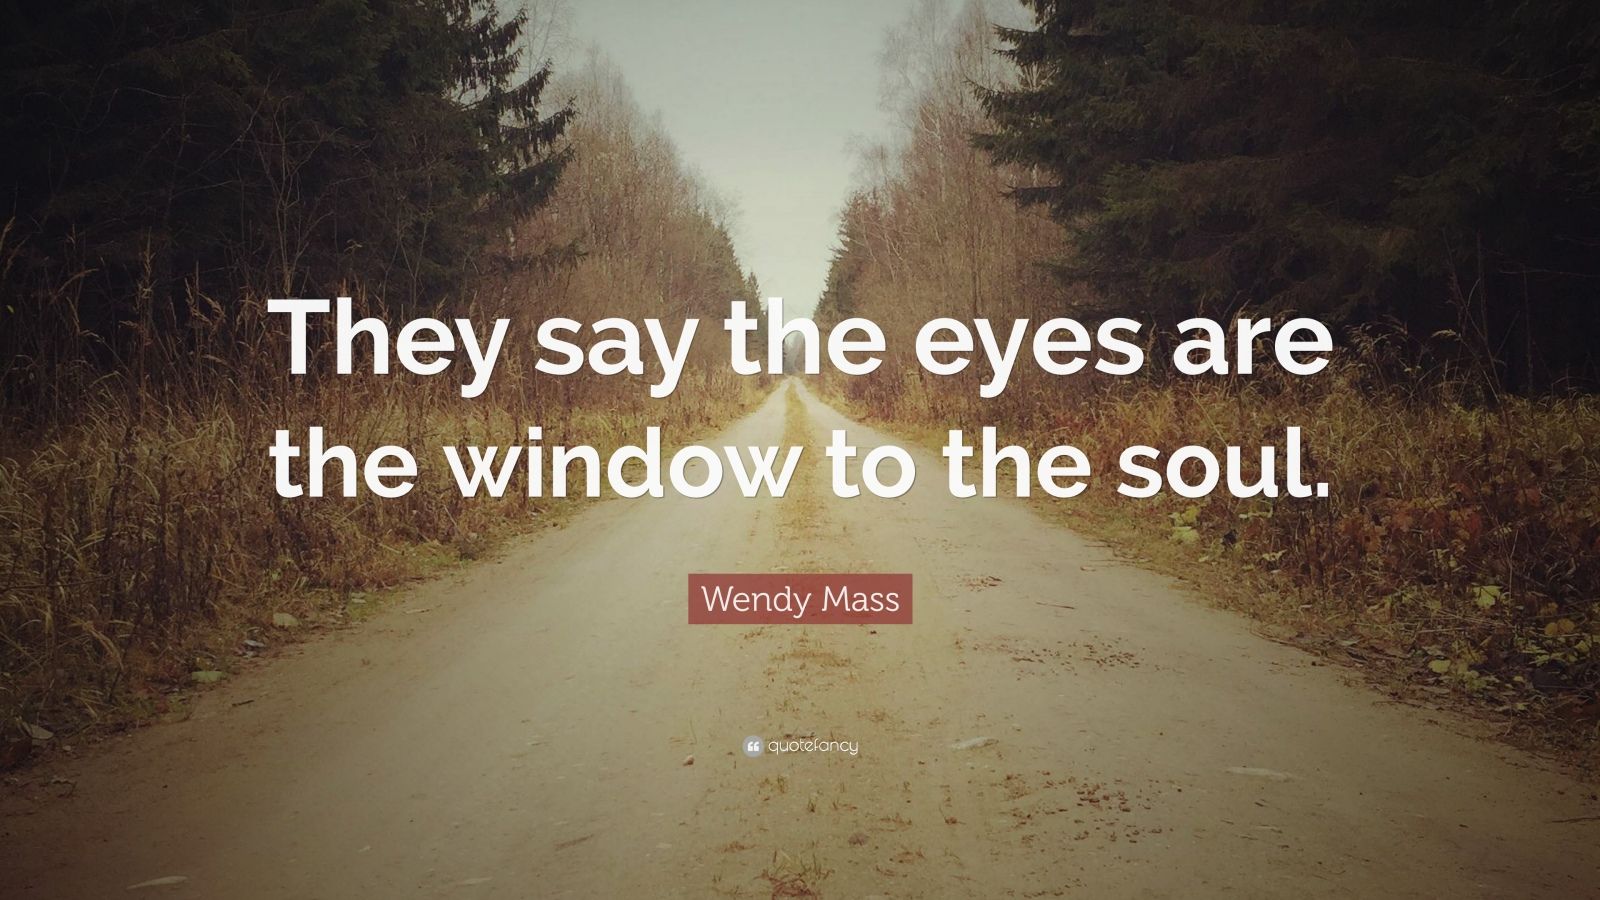 Wendy Mass Quote: “They say the eyes are the window to the soul.” (12